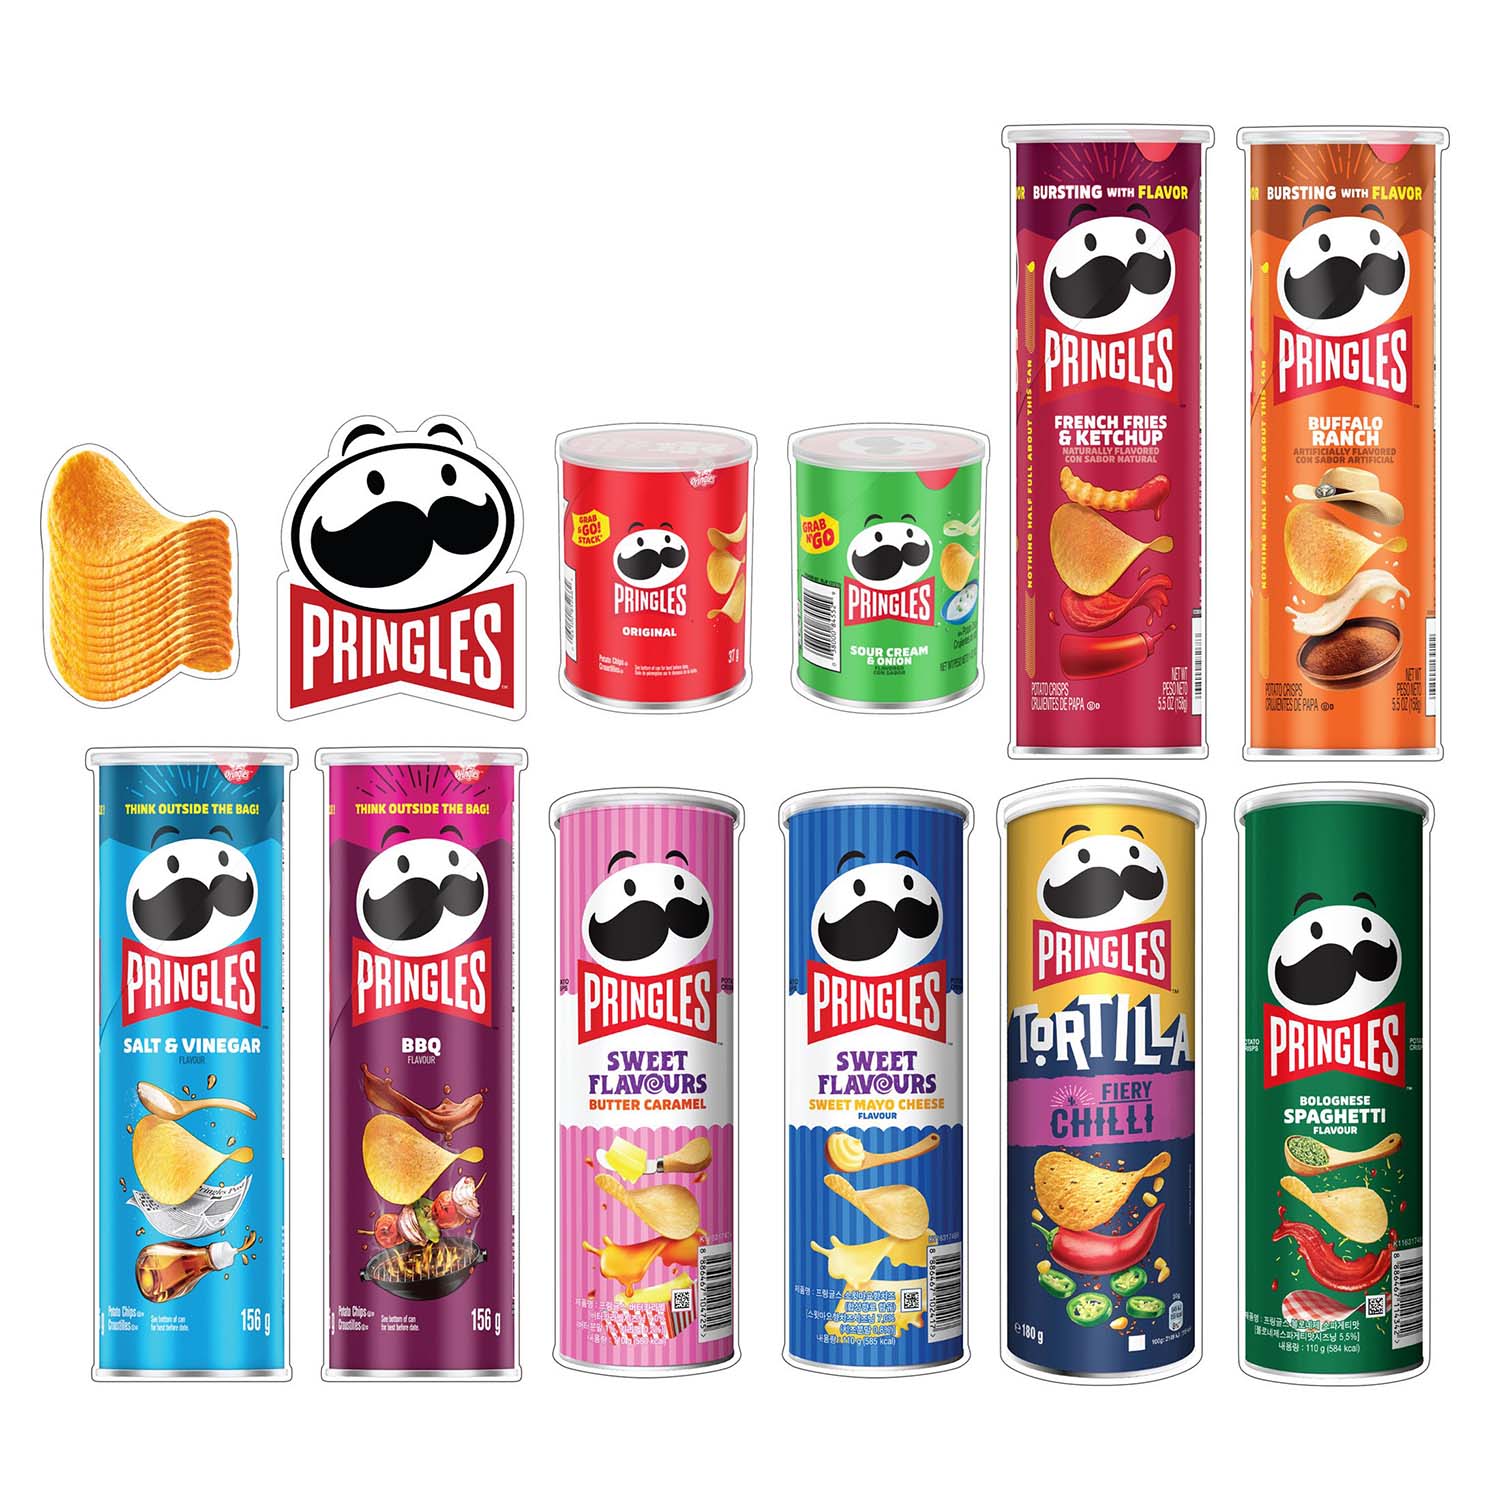 Pringles Food and Drink Jigsaw Puzzle